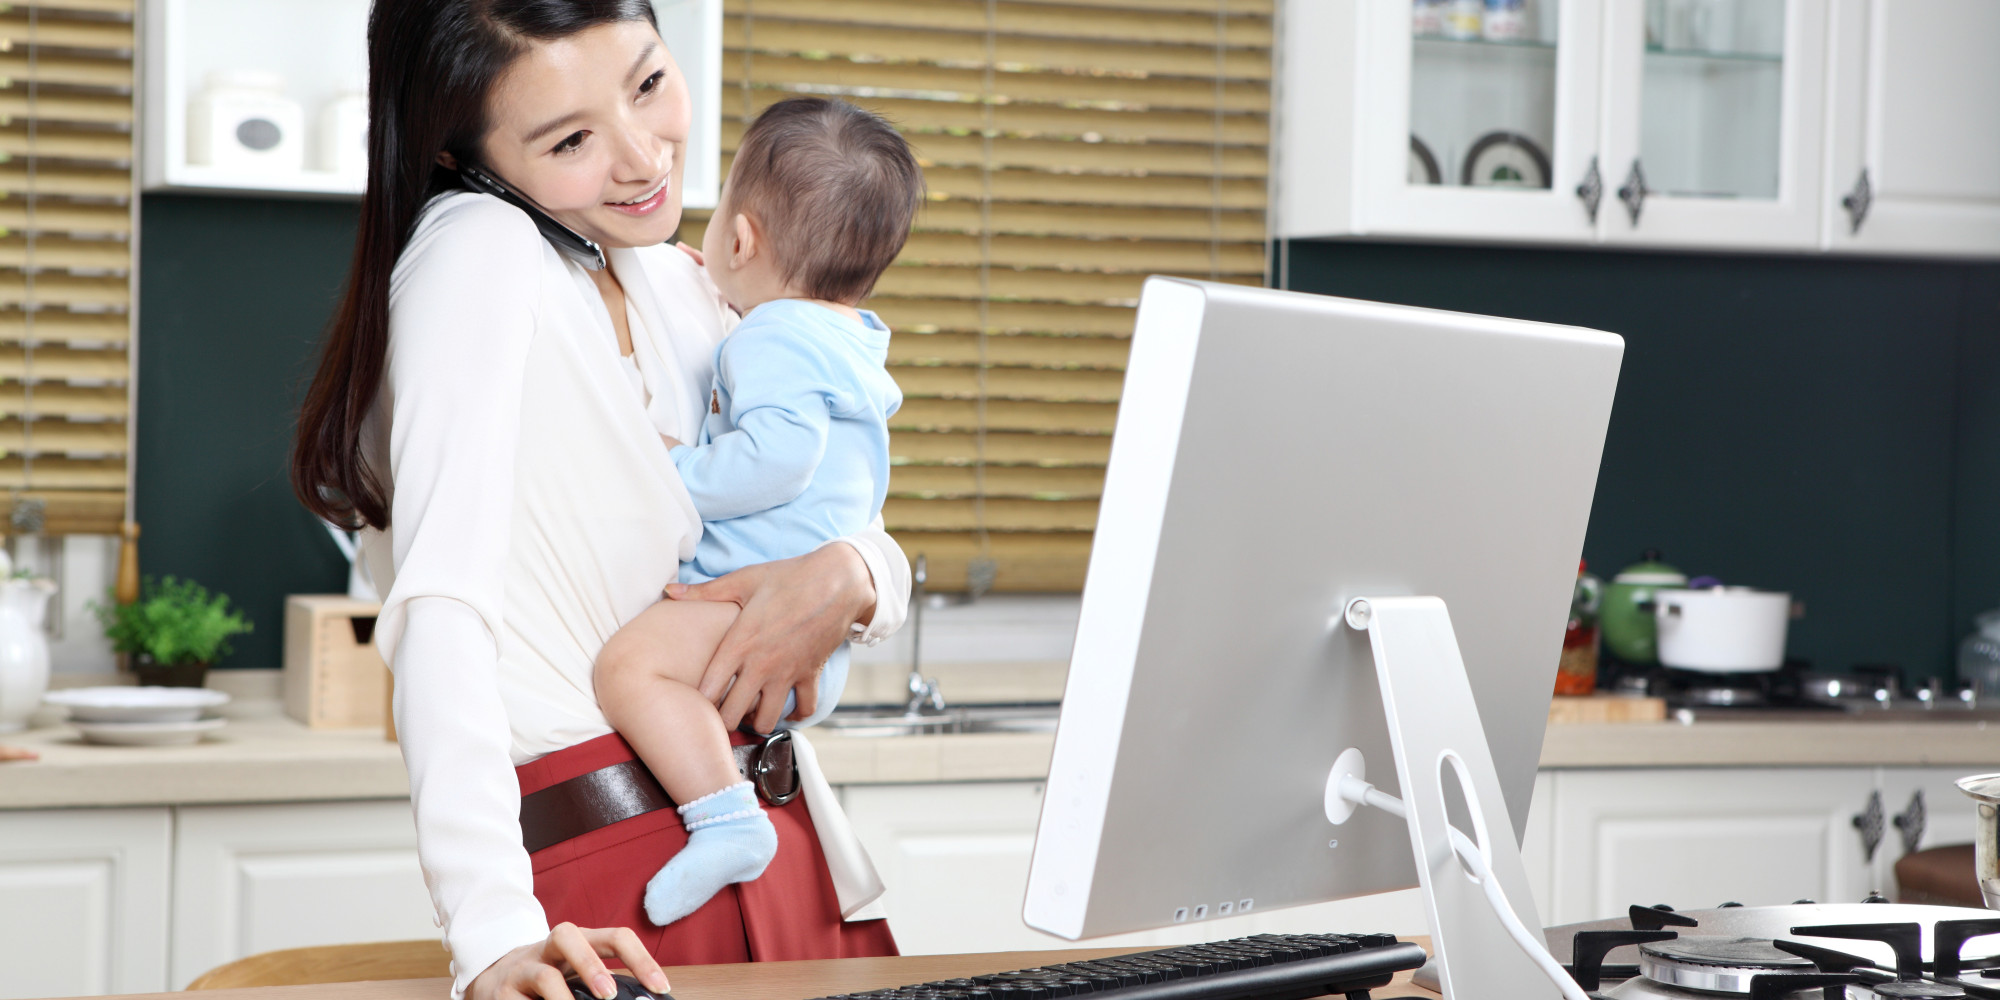 Start An Online Business As A Stay At Home Mom